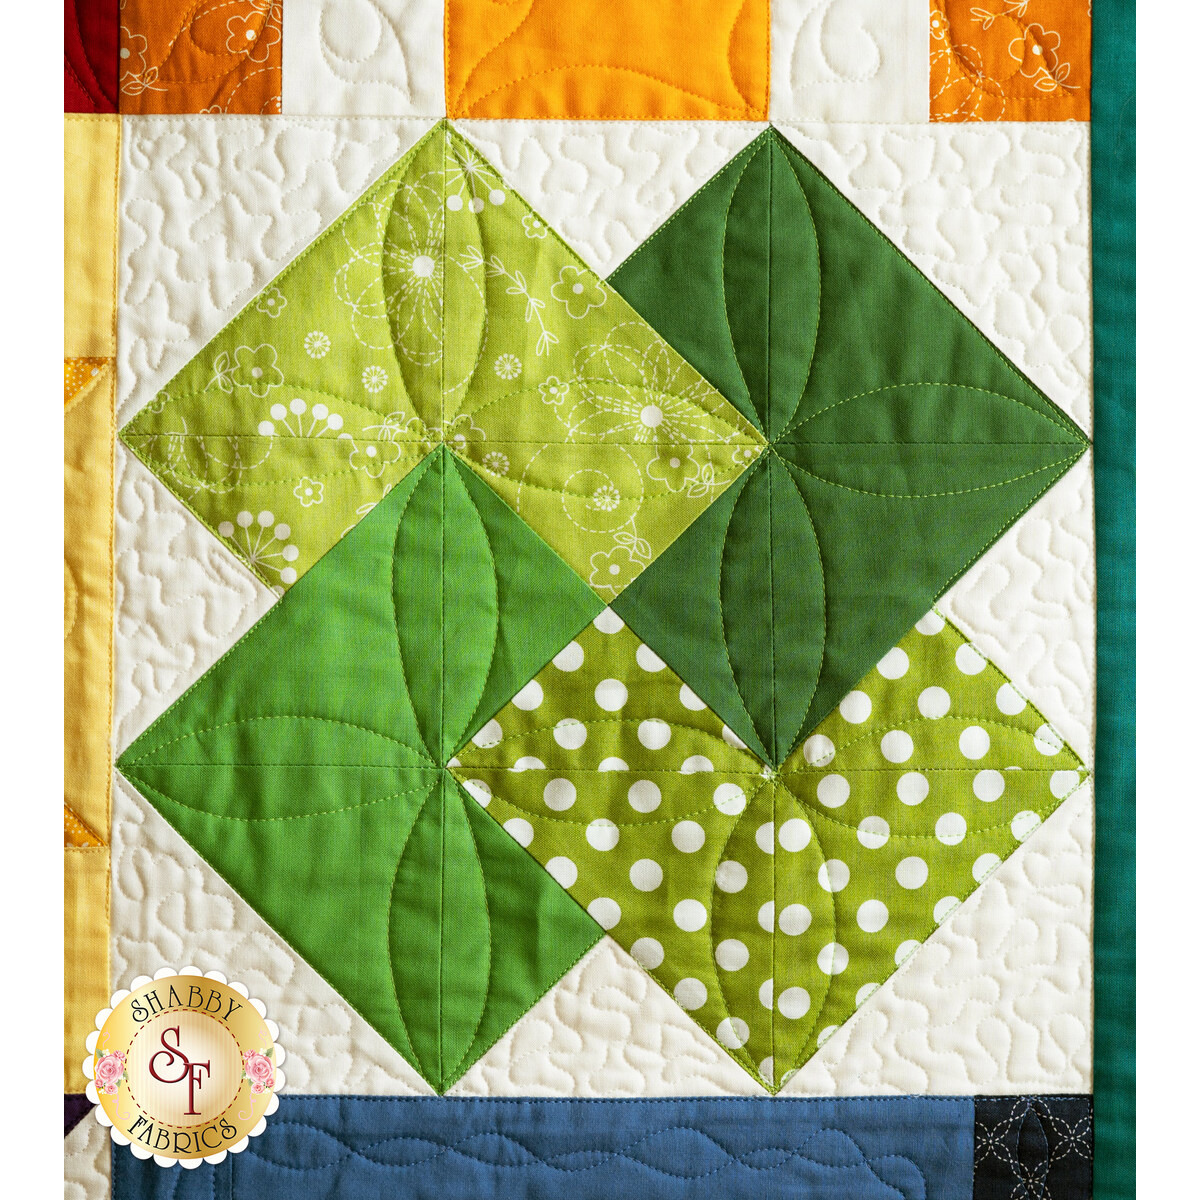 Five Quilt Patterns for Beginner Quilters – Create Beautiful Quilts